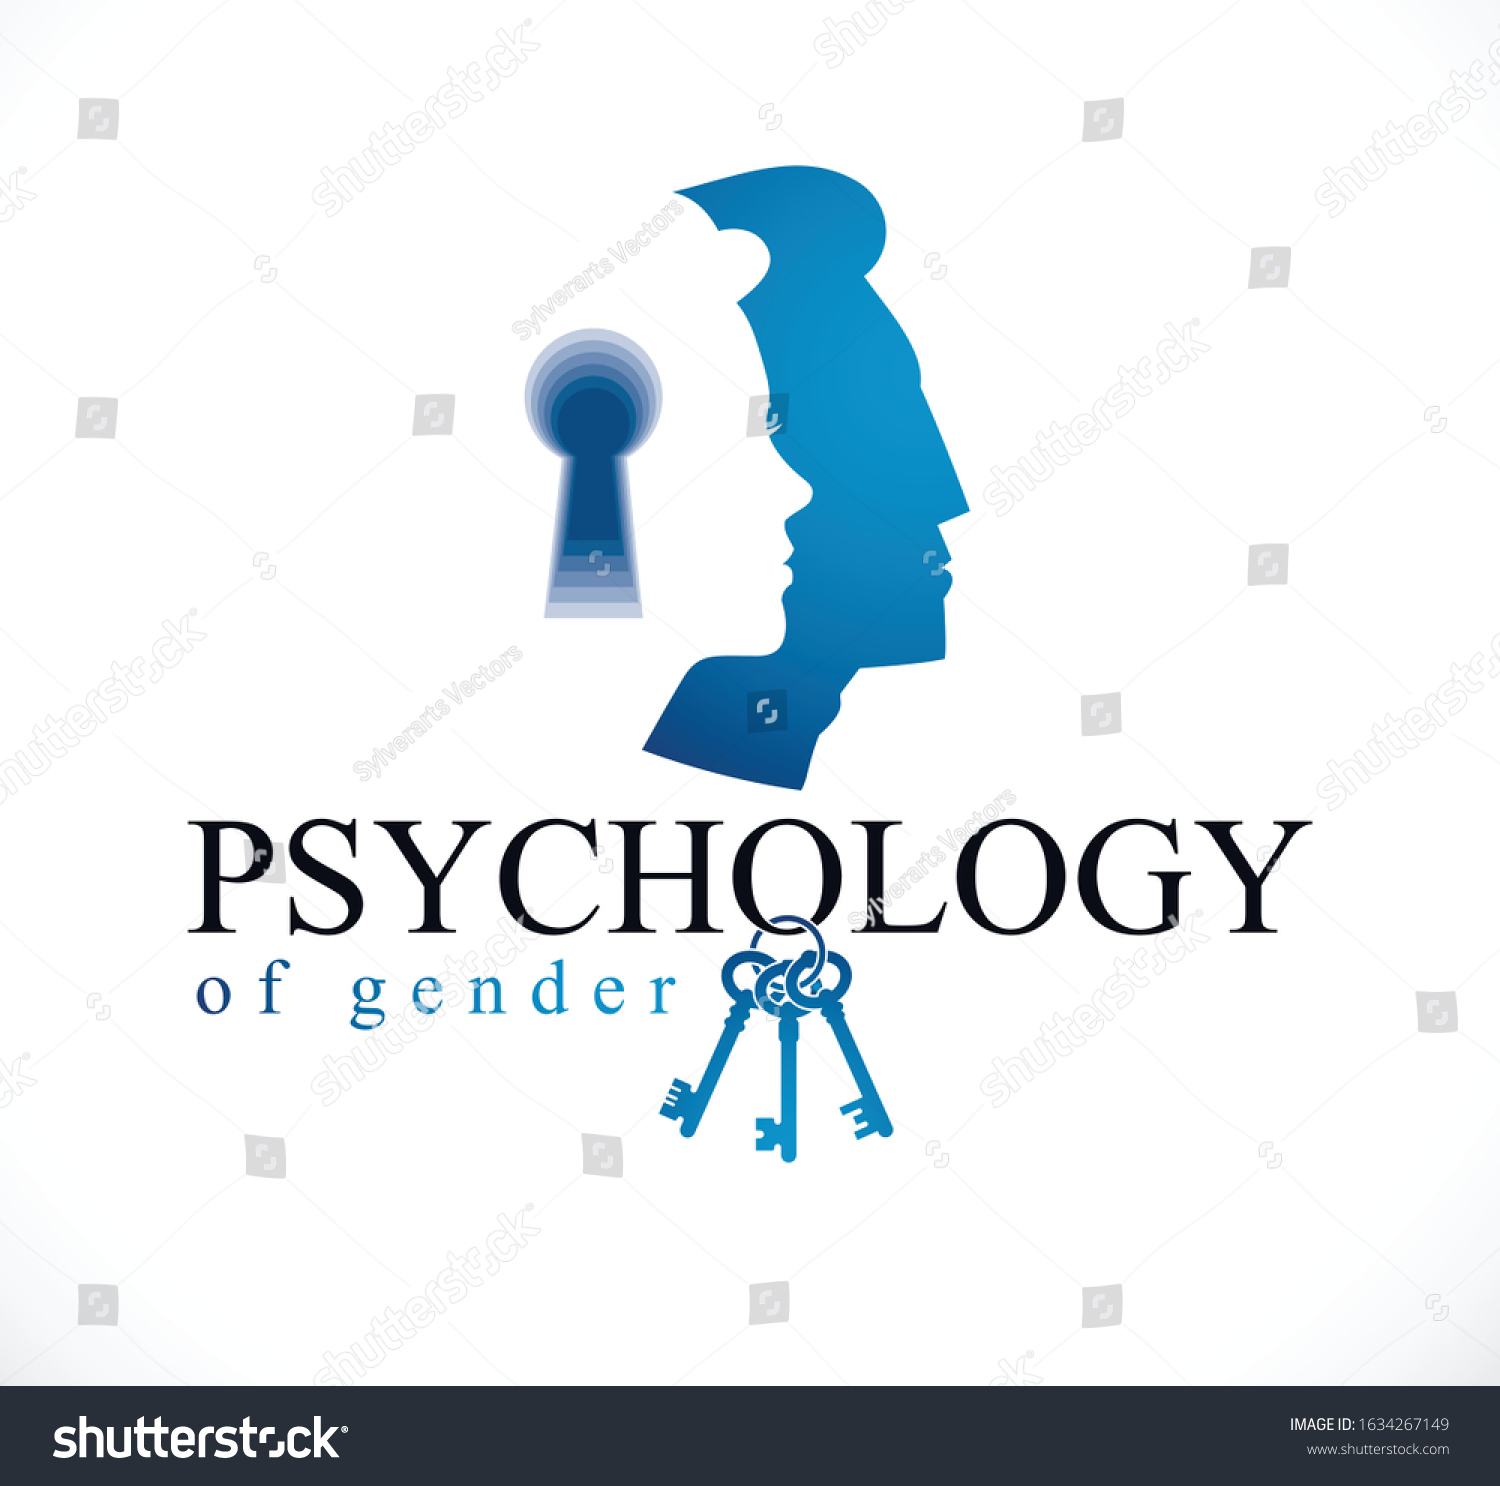 Gender Psychology Concept Created Man Woman Stock Vector Royalty Free 1634267149 8289